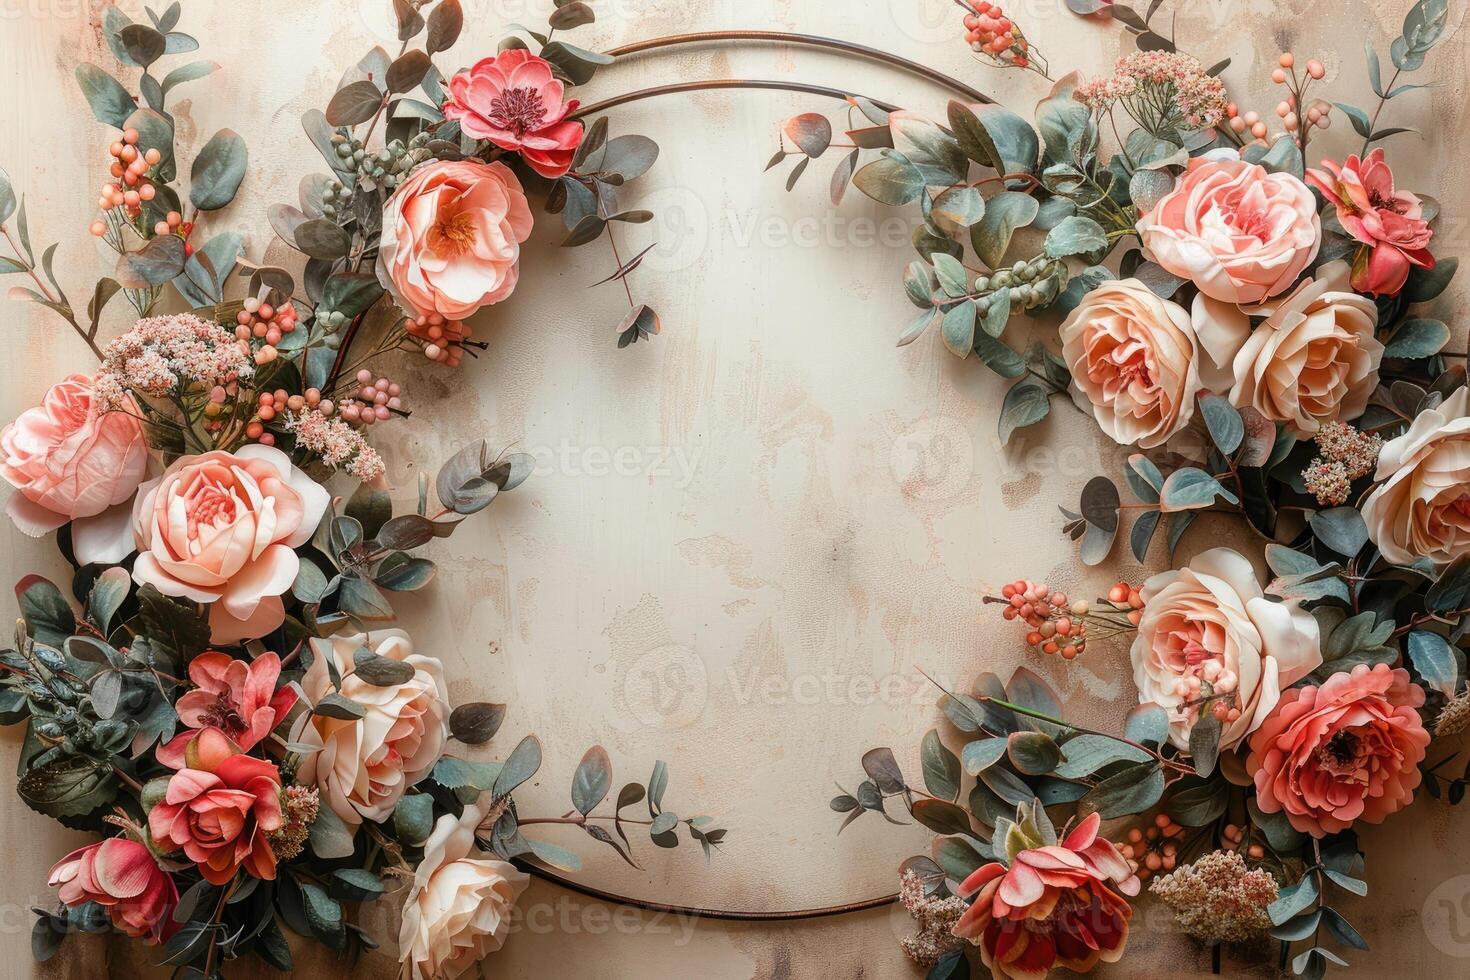 A beautifully arranged floral wreath of roses and foliage on a subtle vintage textured background, perfect for weddings and elegant events photo